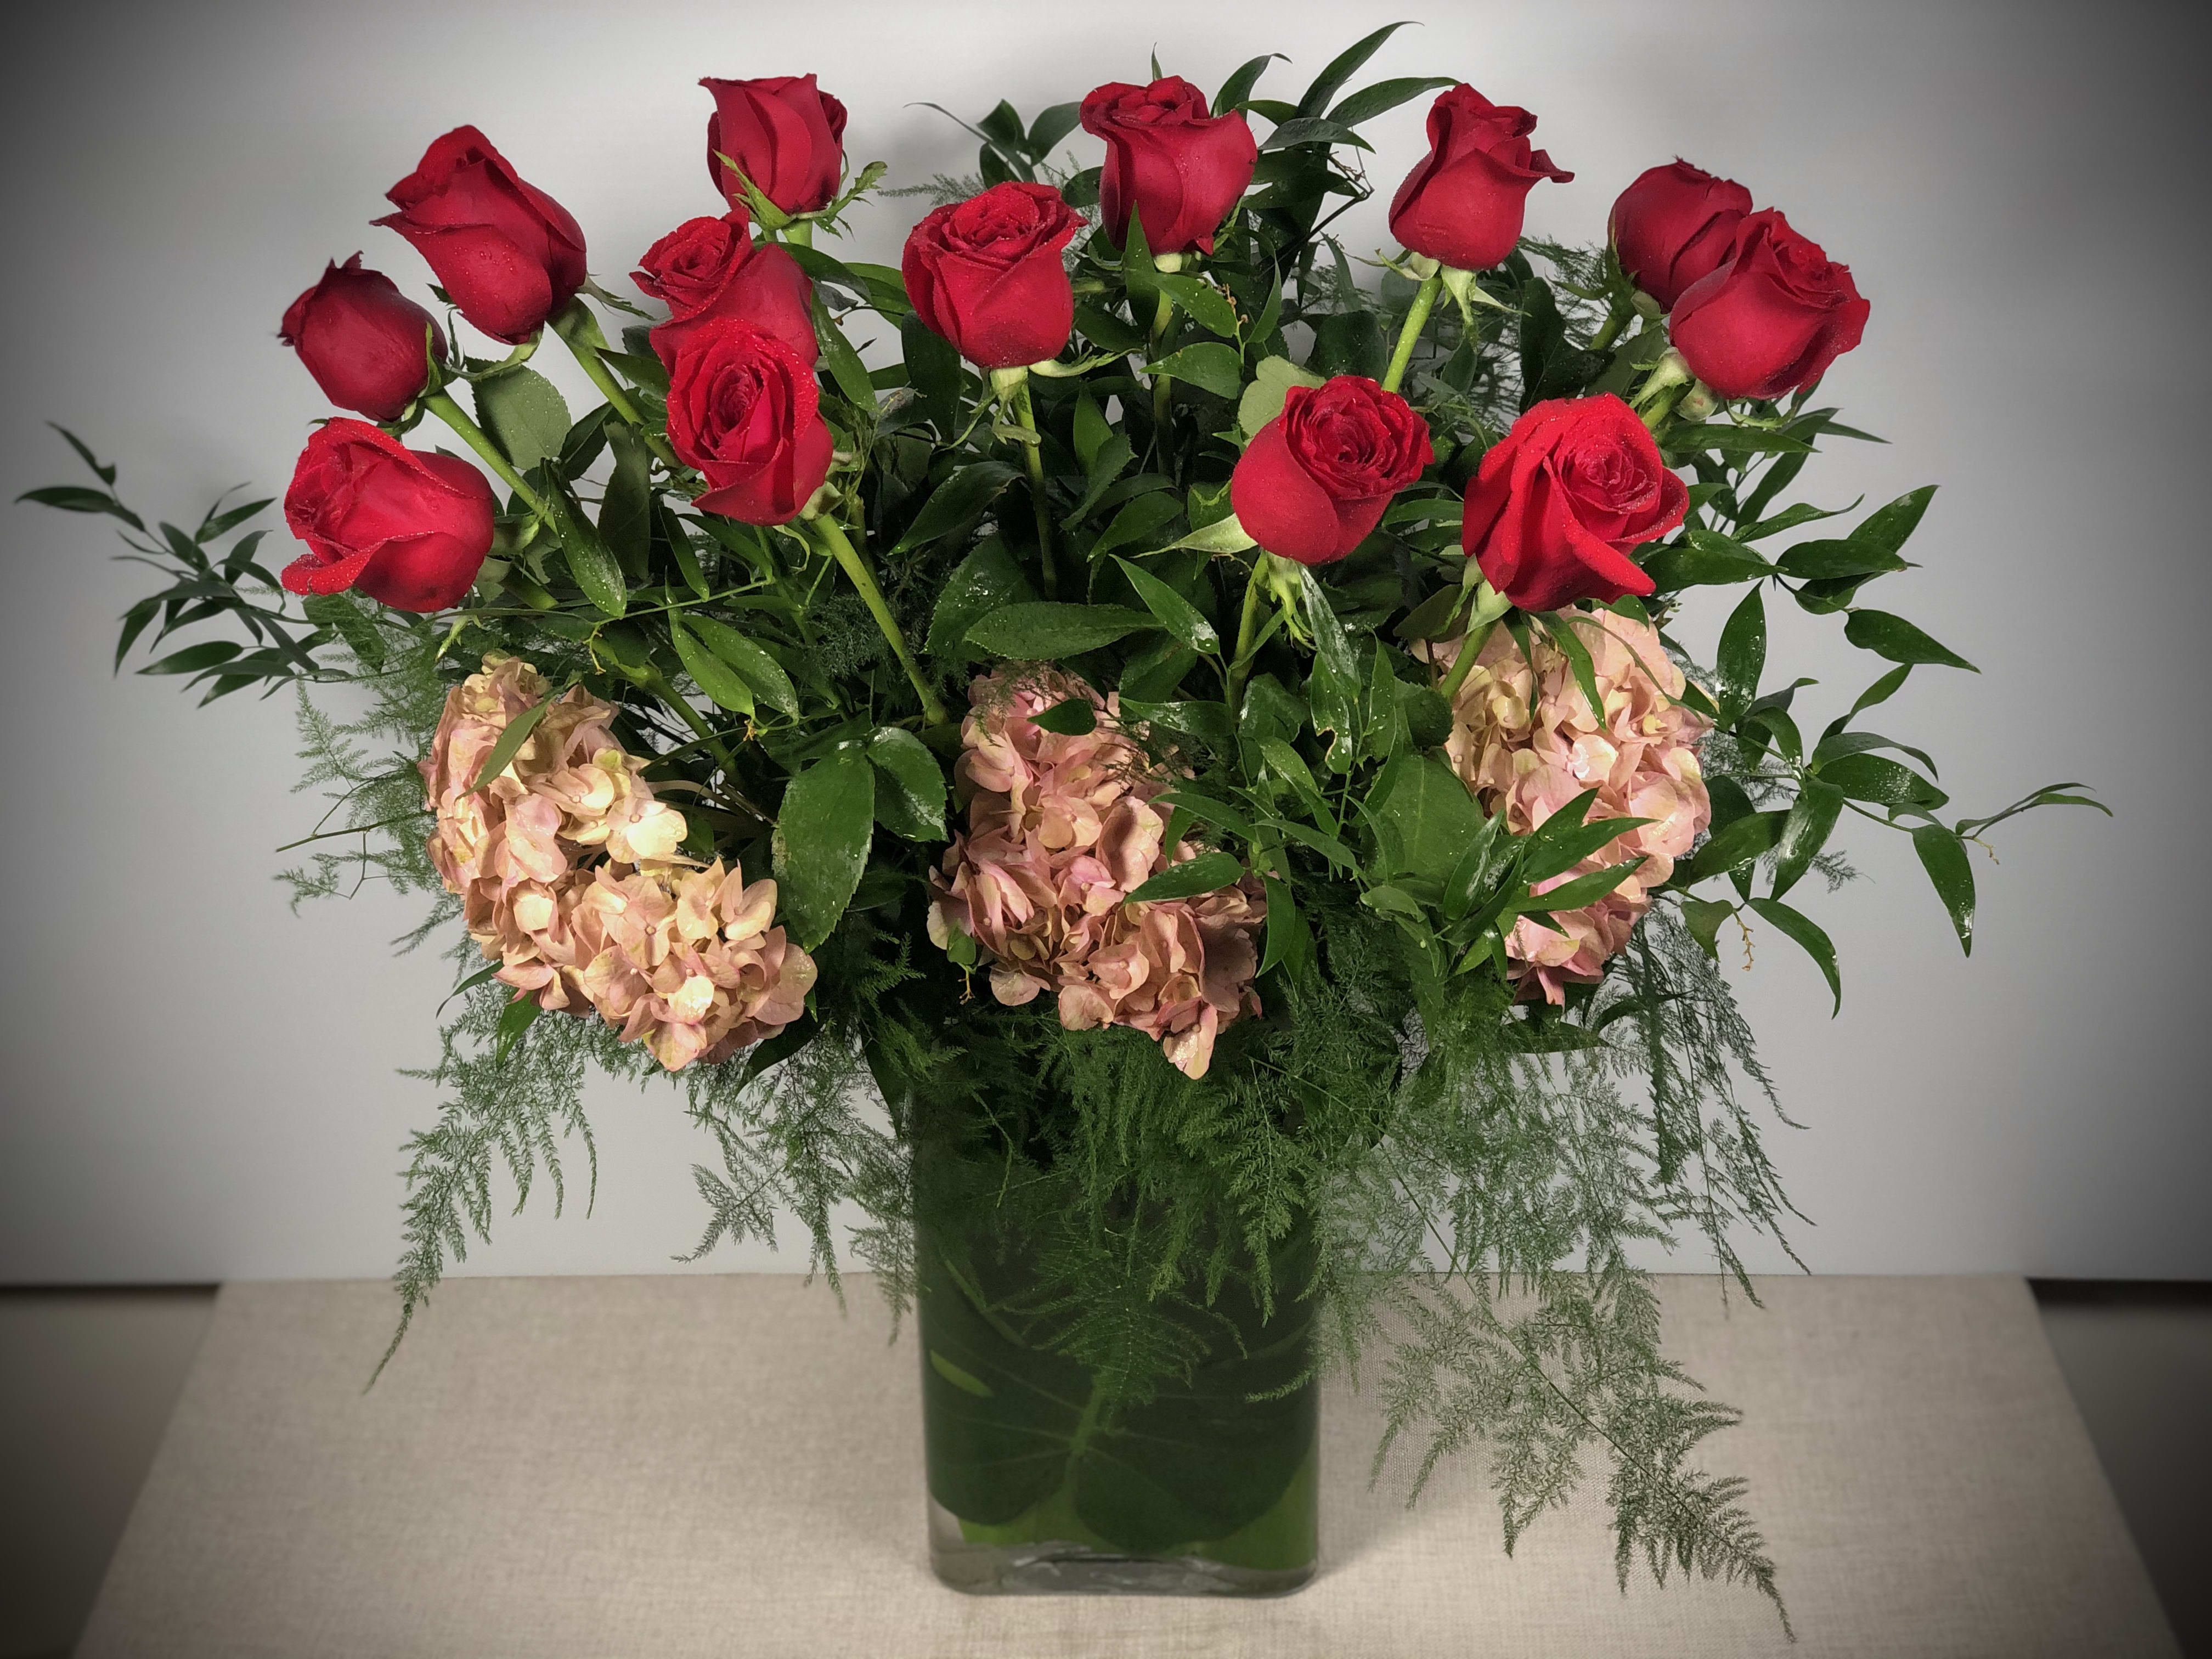 Sweet Valentines - Our luxurious version of the traditional dozen long-stem red roses... soft greens and fluffy hydrangeas add to vibrant red roses to take this Valentine's Day staple to a whole new level.